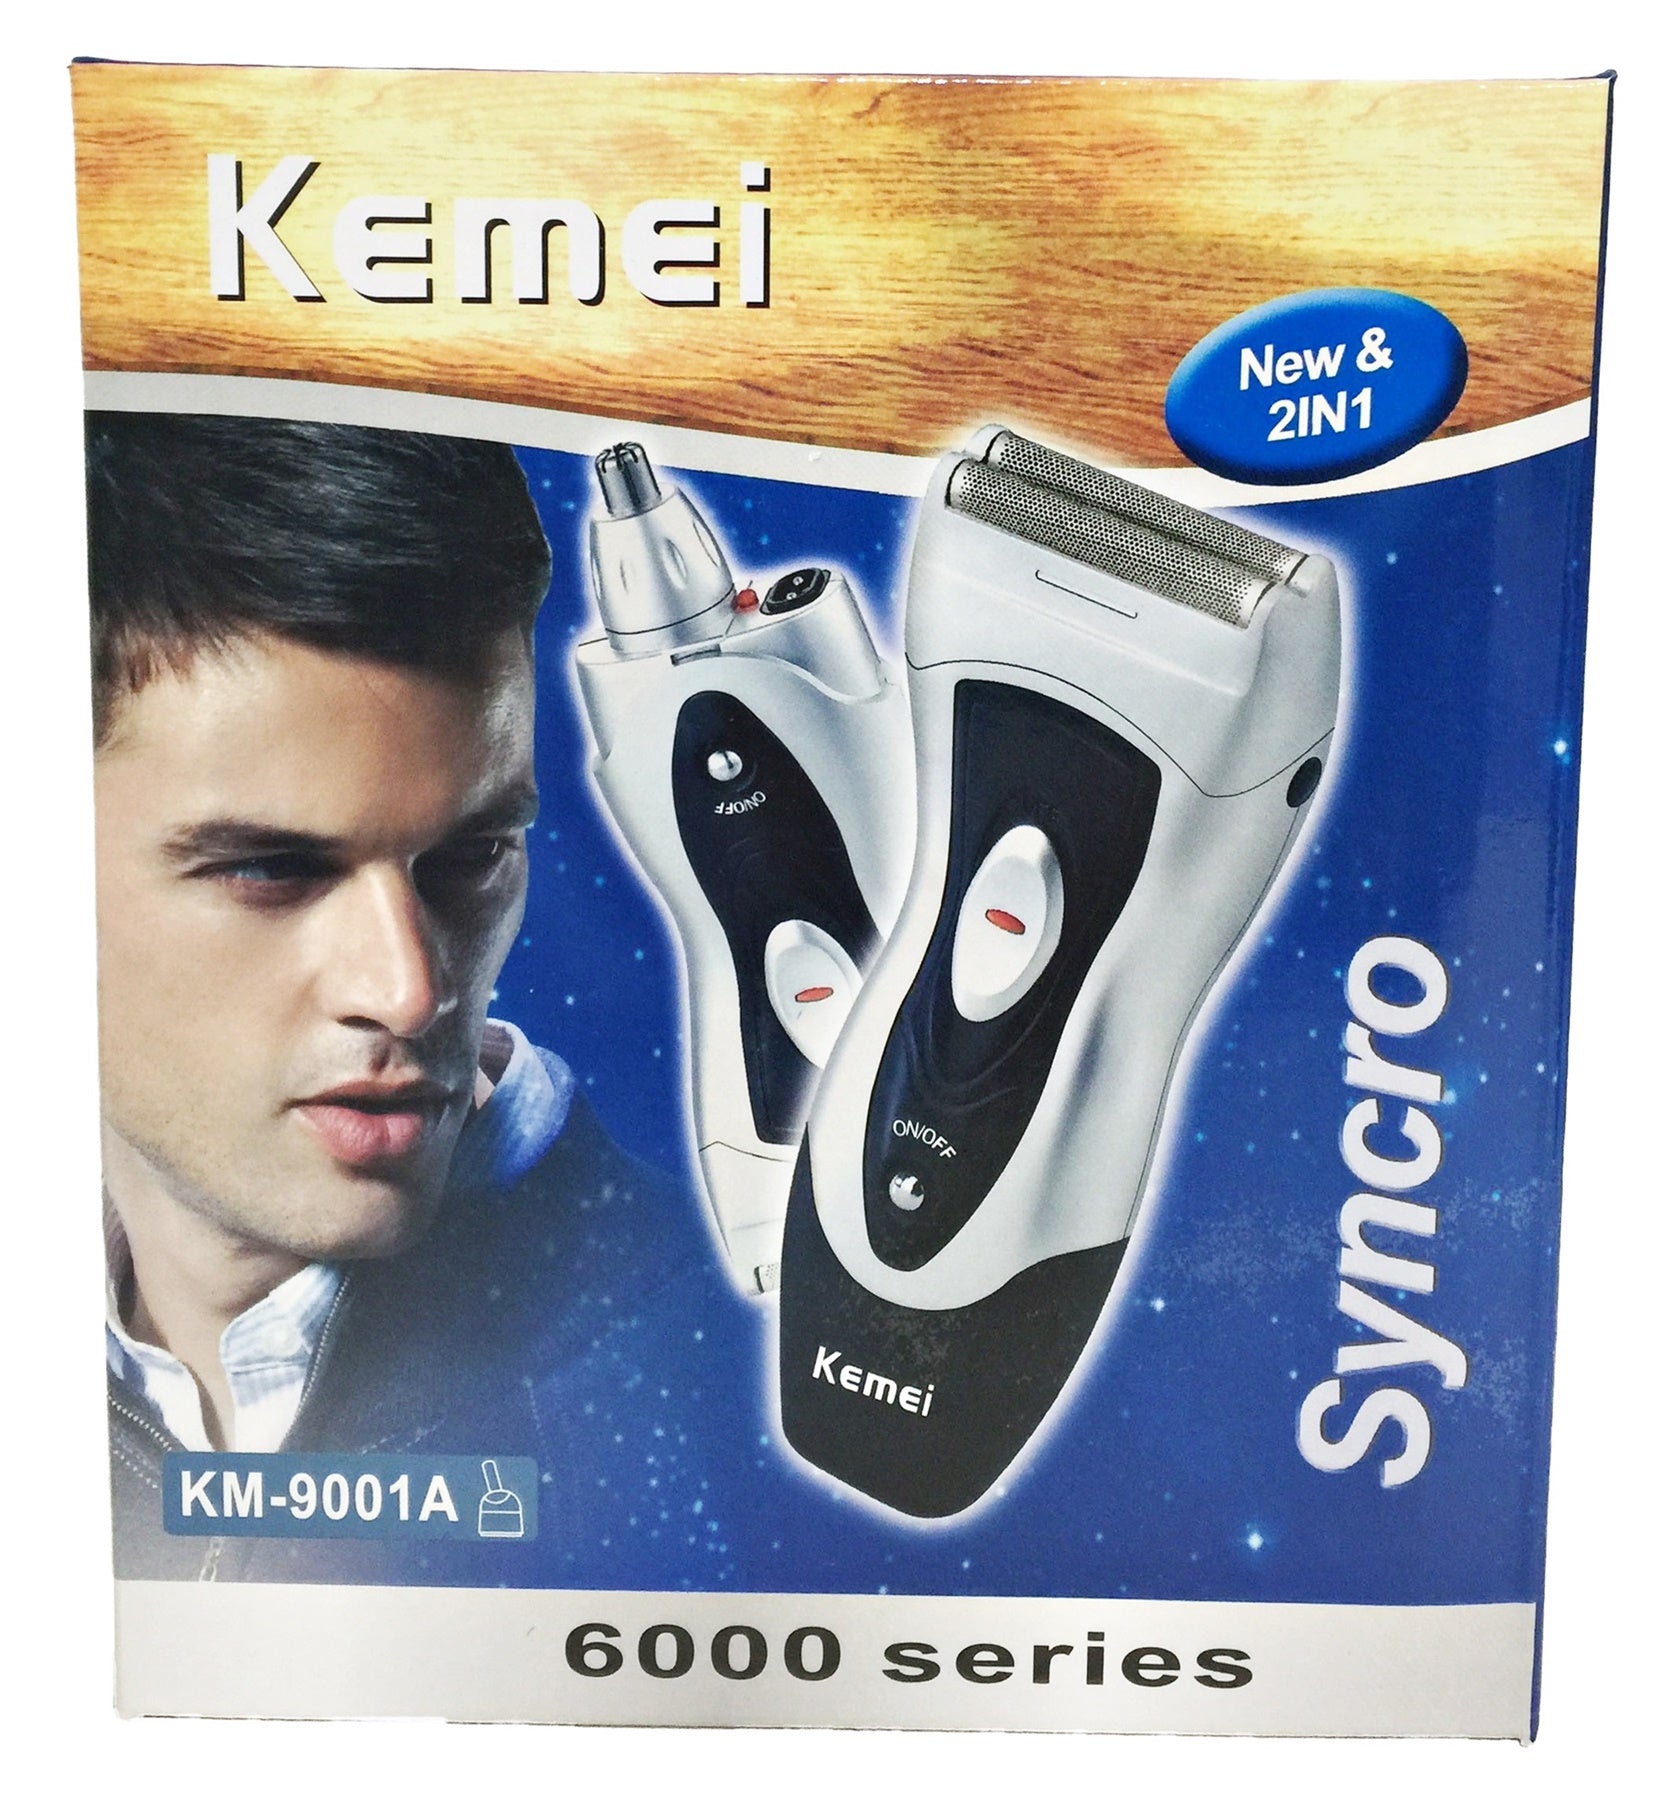 Kemei 2-in-1 Syncro Electric Razor Nose Trimmer